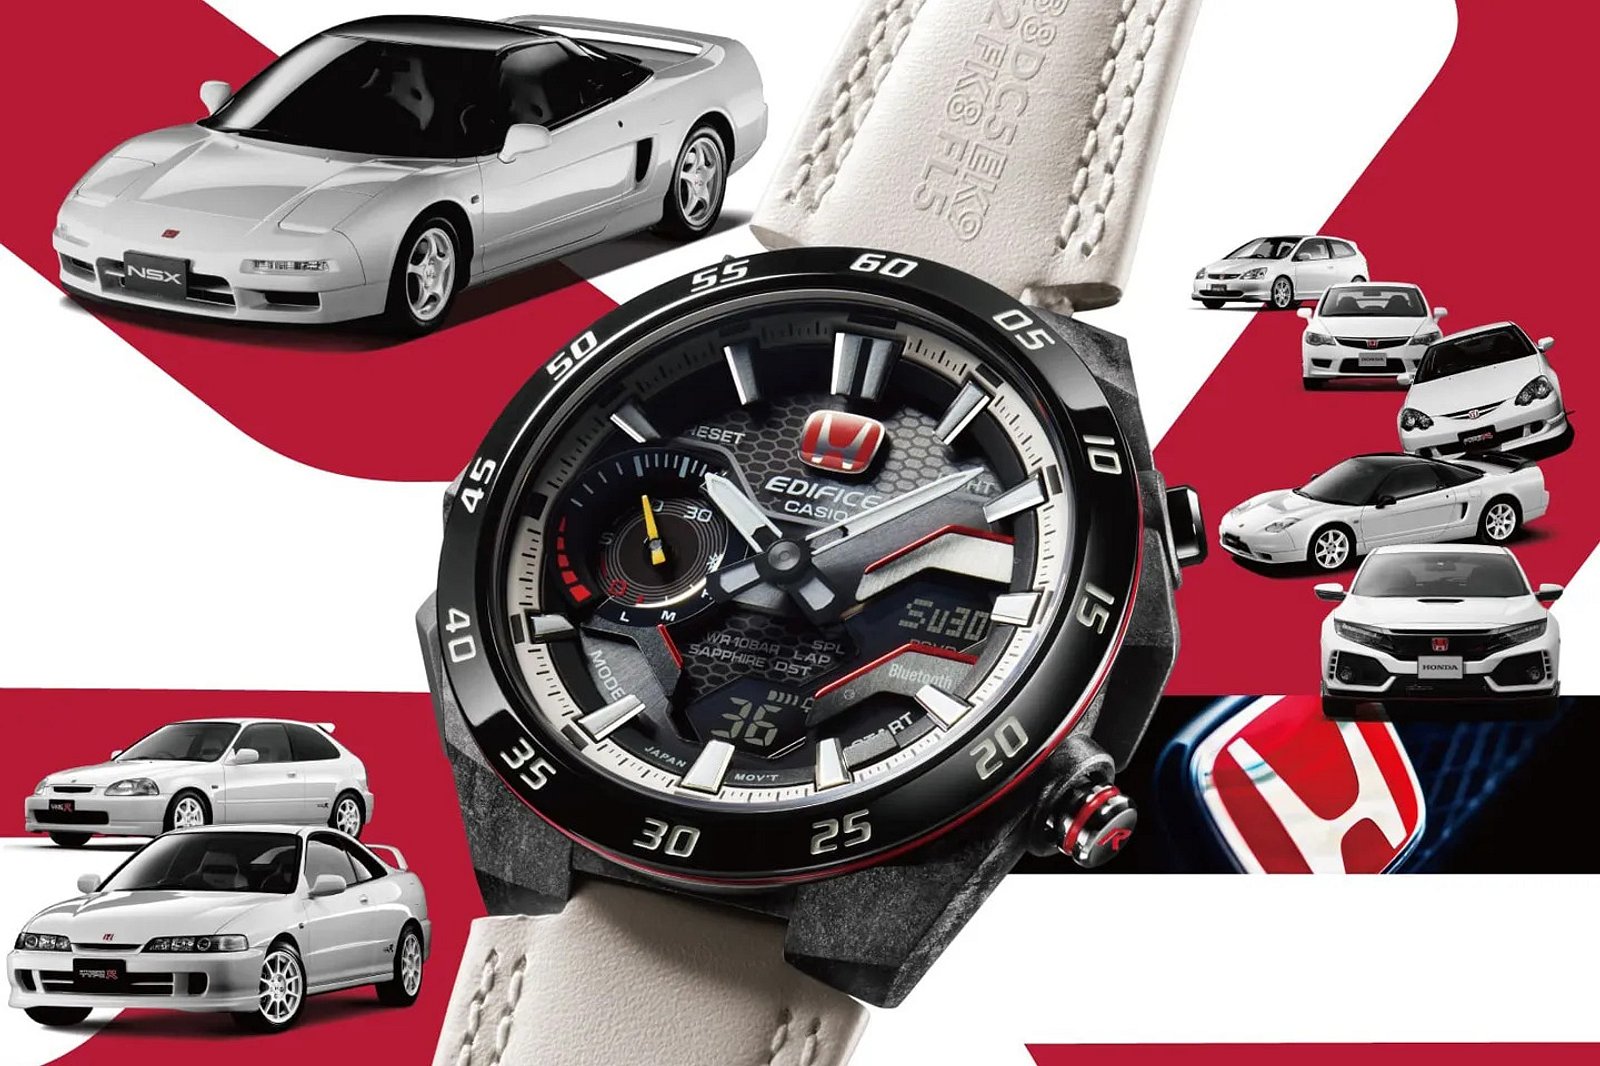 Casio Reveals Awesome New Edifice Watch Inspired By The Honda Type